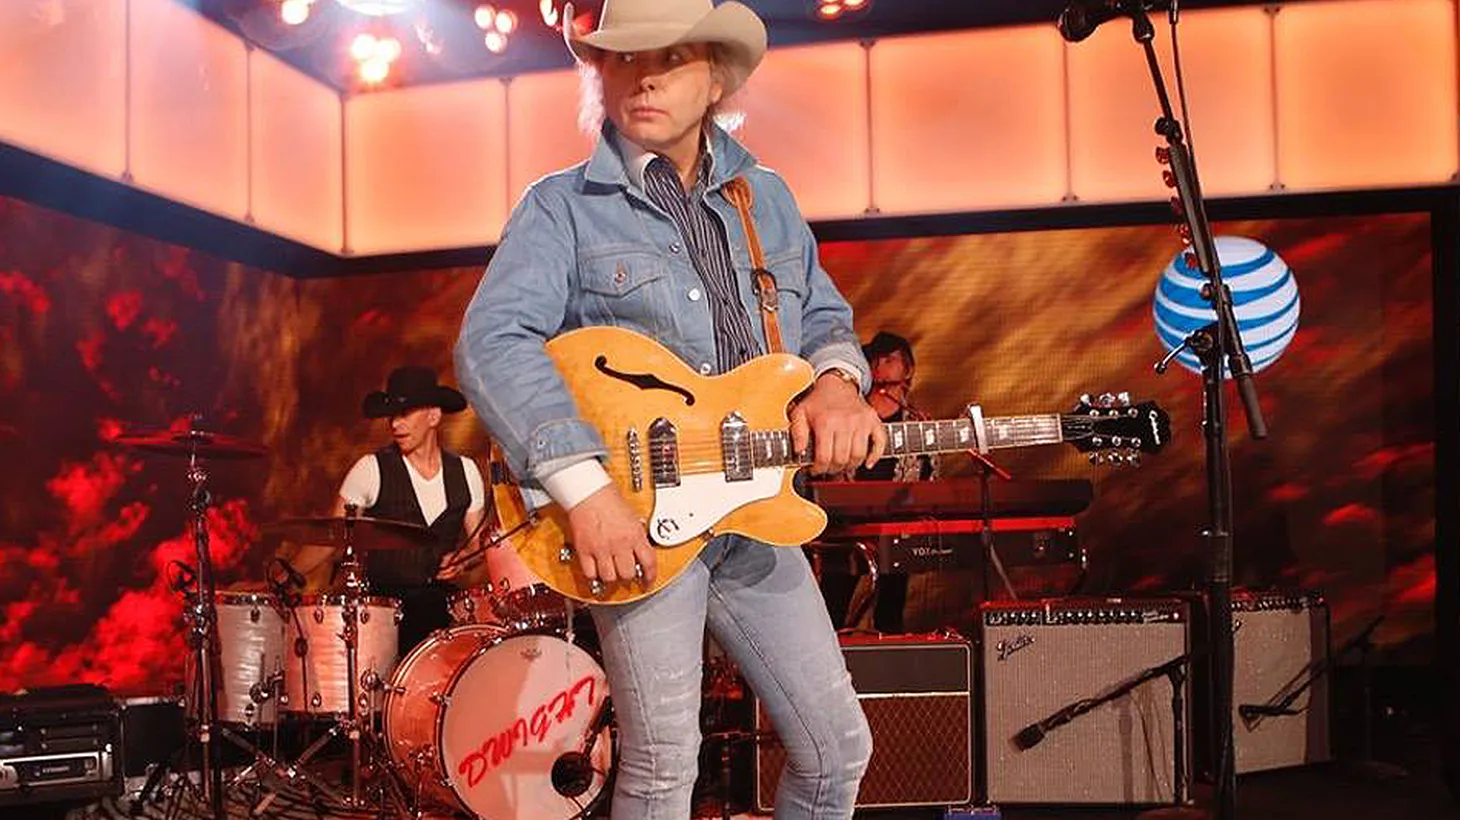 Grammy award-winning songwriter Dwight Yoakam has sold more than 25 million records. He’s kept his sound fresh by embracing a wider range of sounds on recent recordings, including his latest, Second Hand Heart.